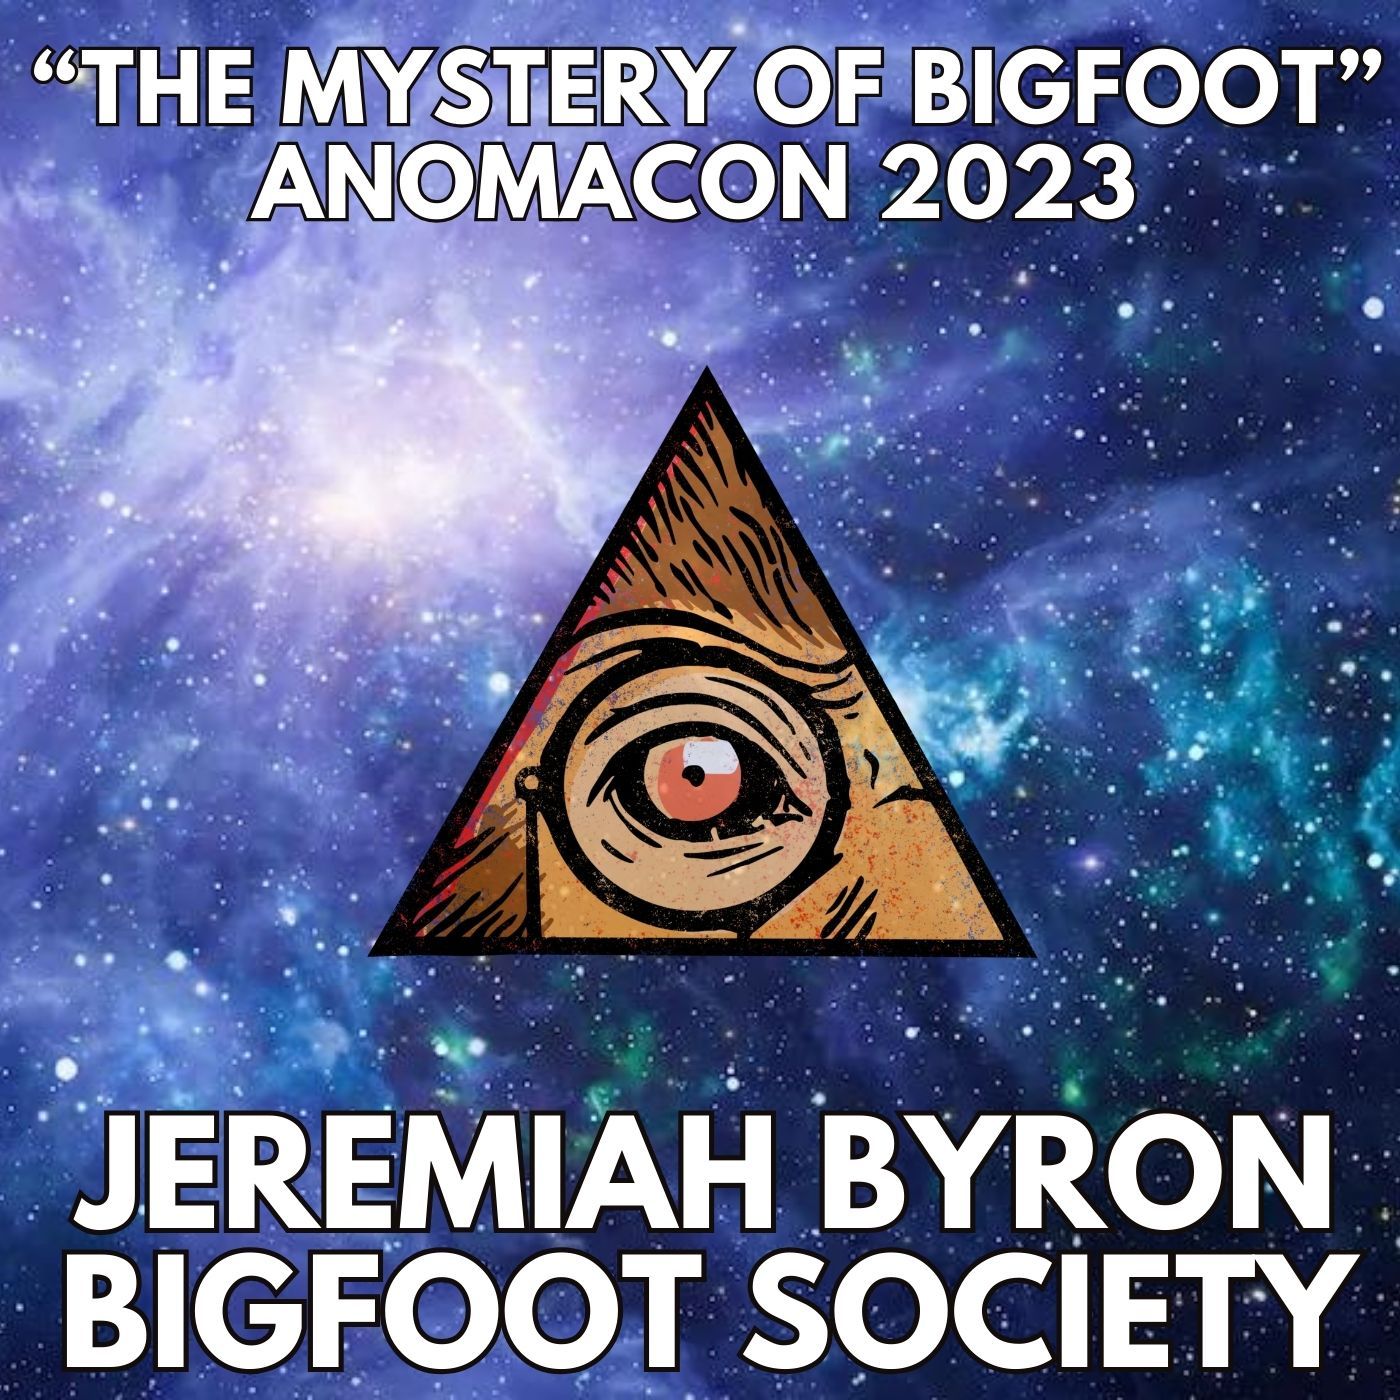 The Mystery of Bigfoot